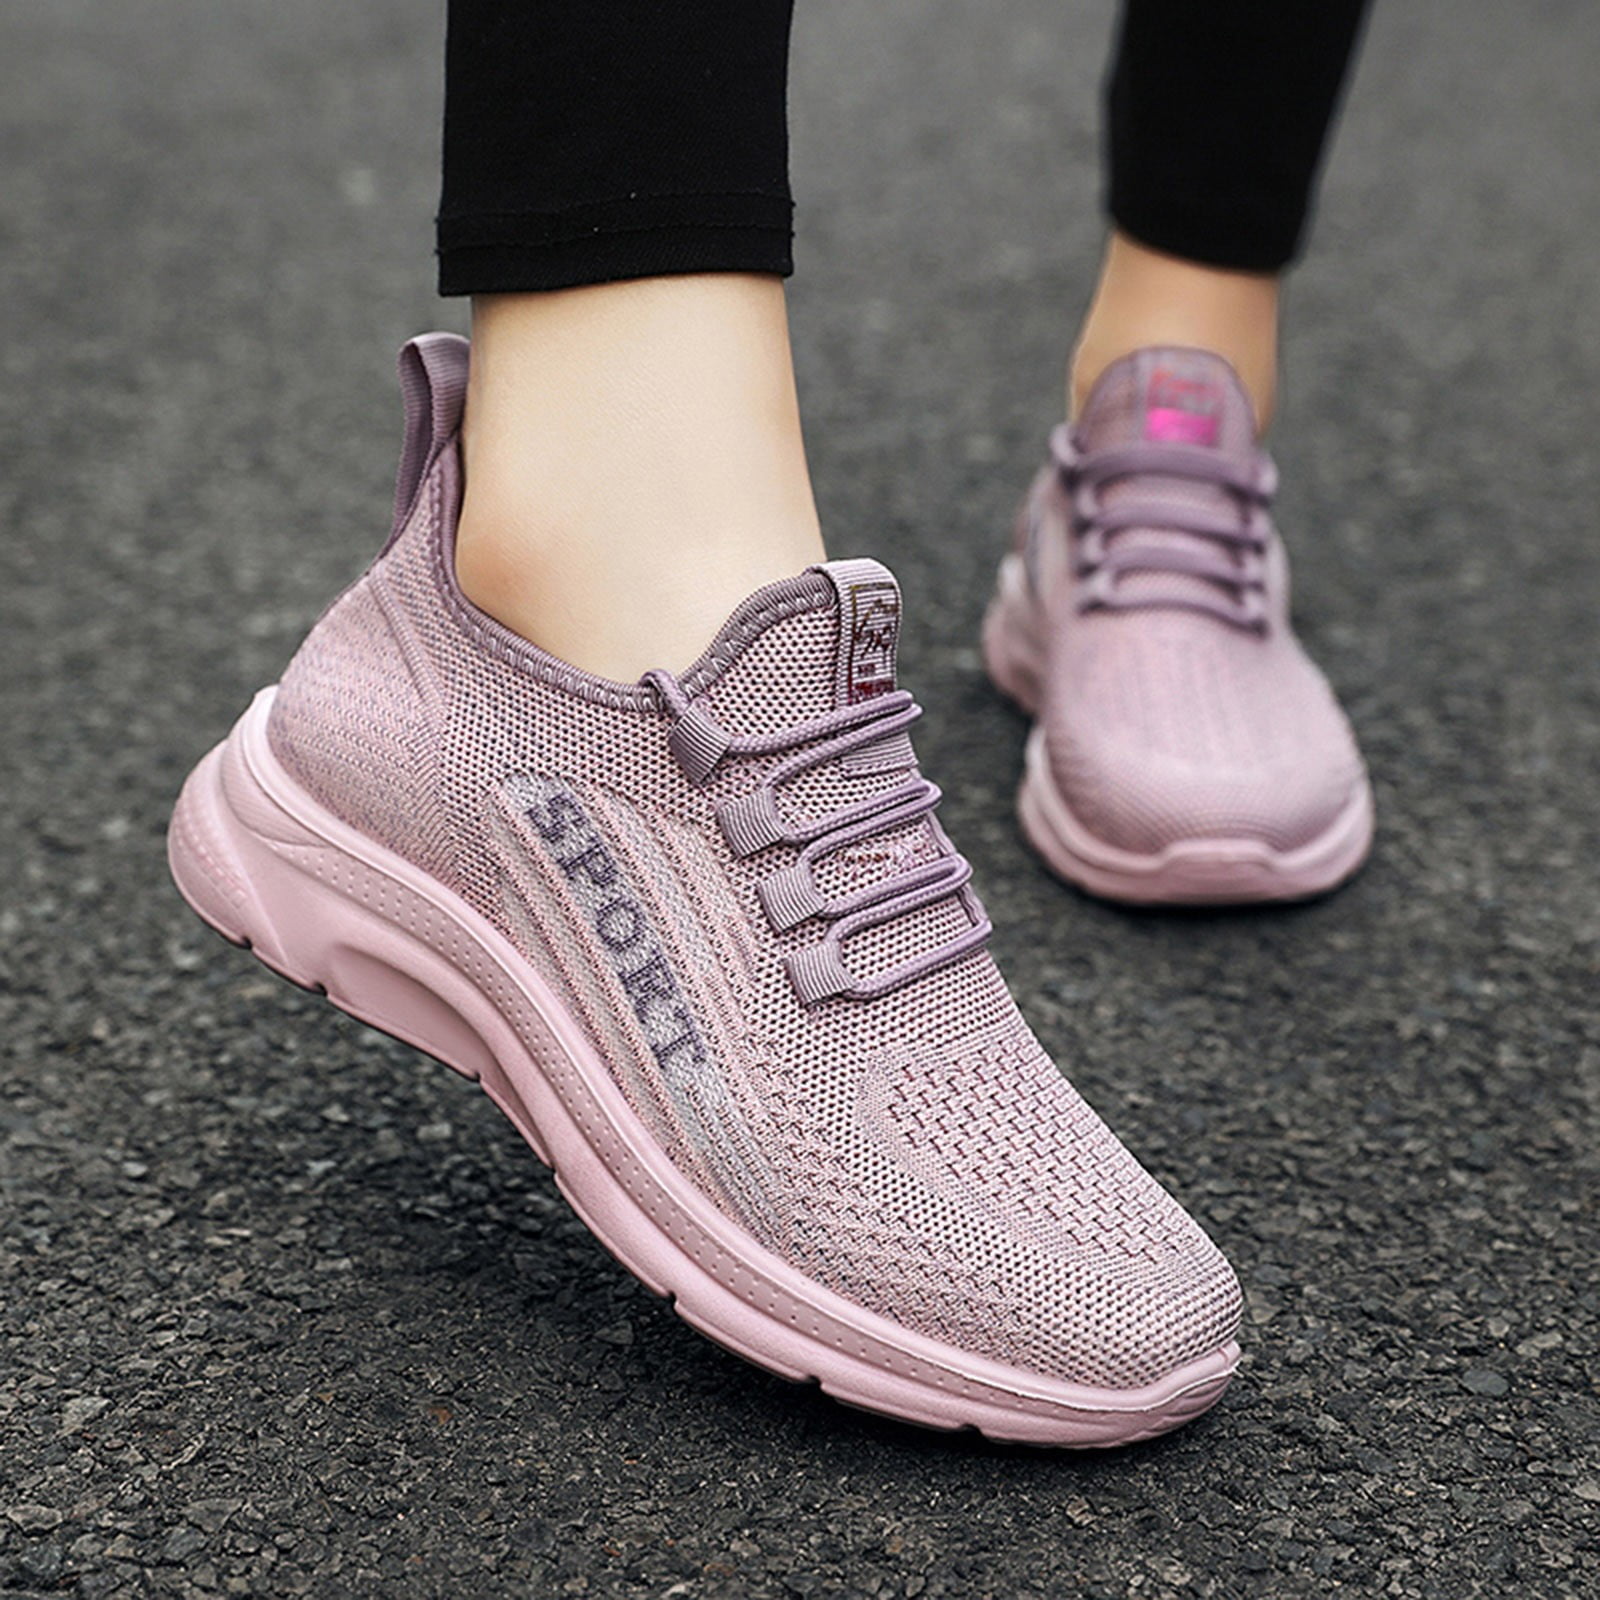 IRSOE Latest Ladies Inner High Heel Sports Shoes,Super Soft and comfortable  Sneakers Walking Shoes For Women - Buy IRSOE Latest Ladies Inner High Heel  Sports Shoes,Super Soft and comfortable Sneakers Walking Shoes